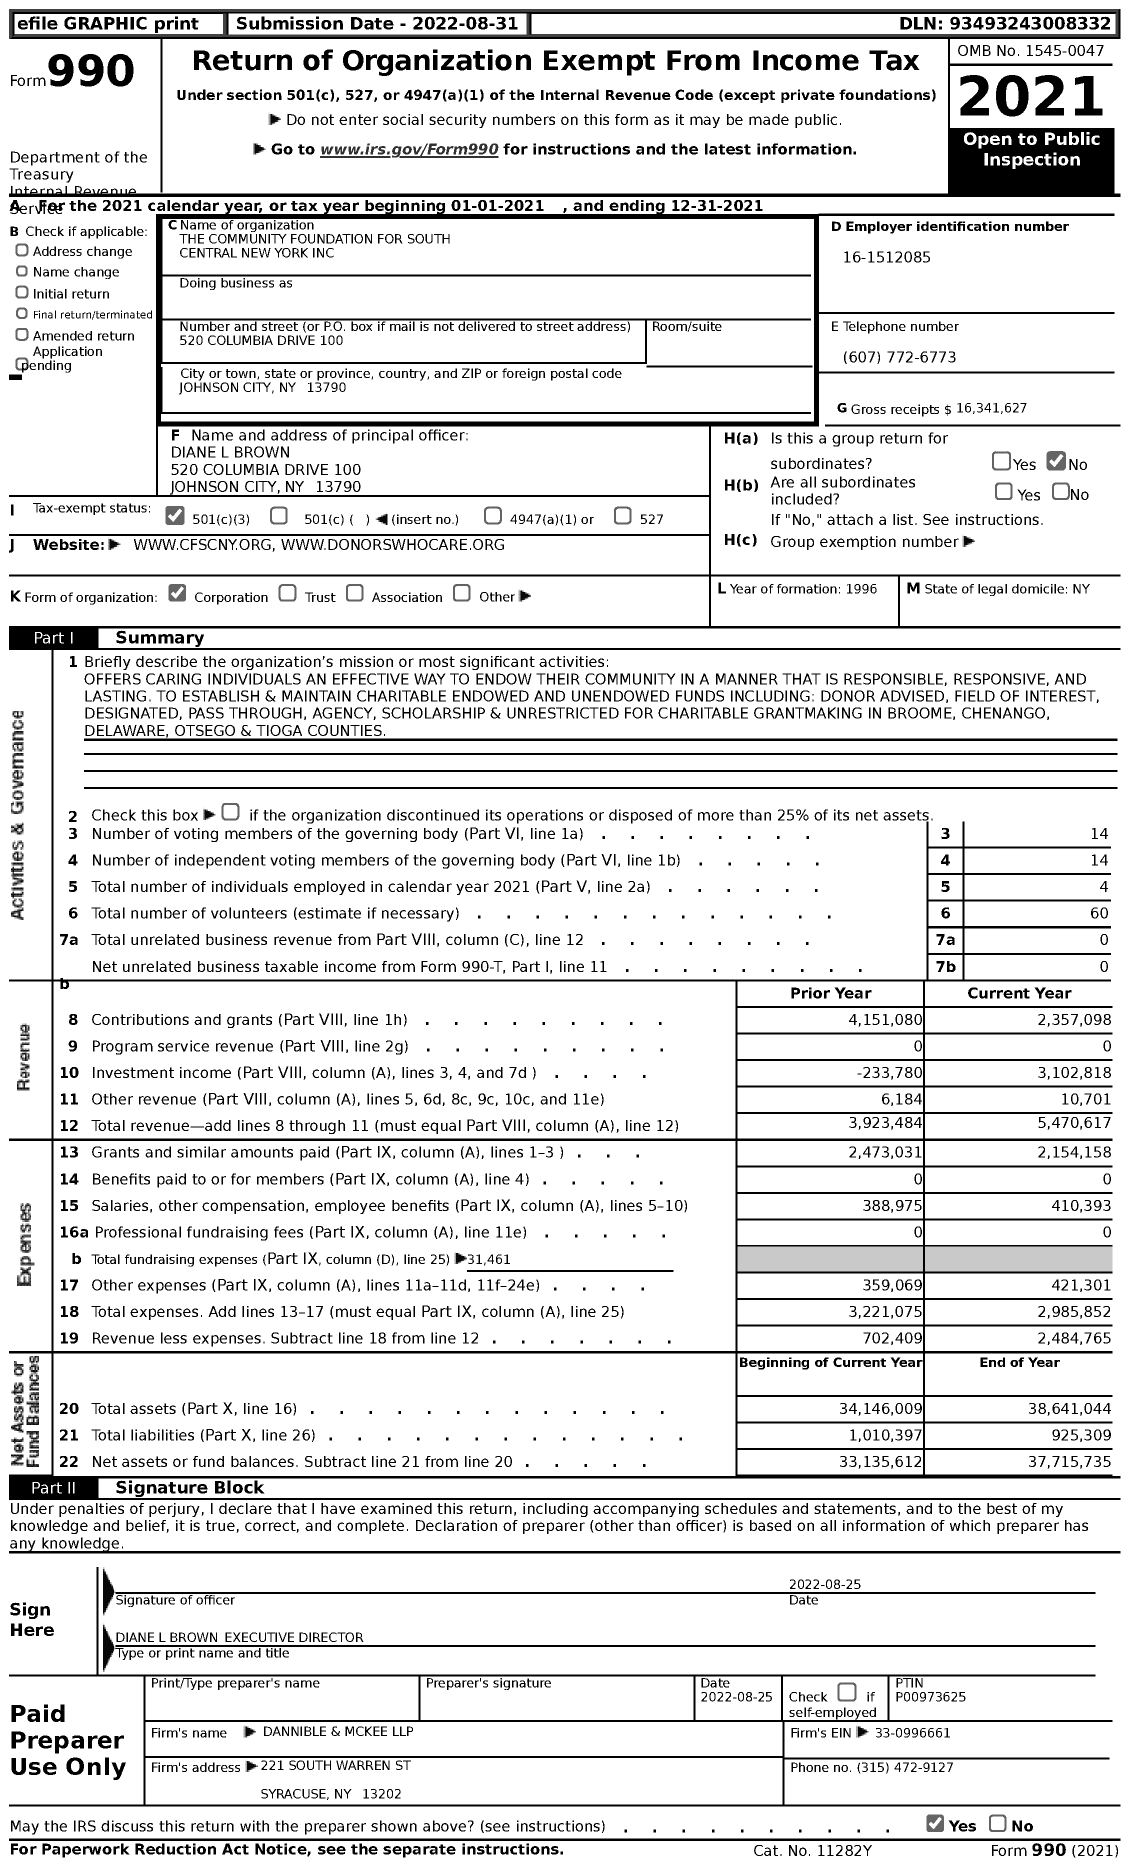 Image of first page of 2021 Form 990 for Community Foundation for South Central New York (CFSCNY)